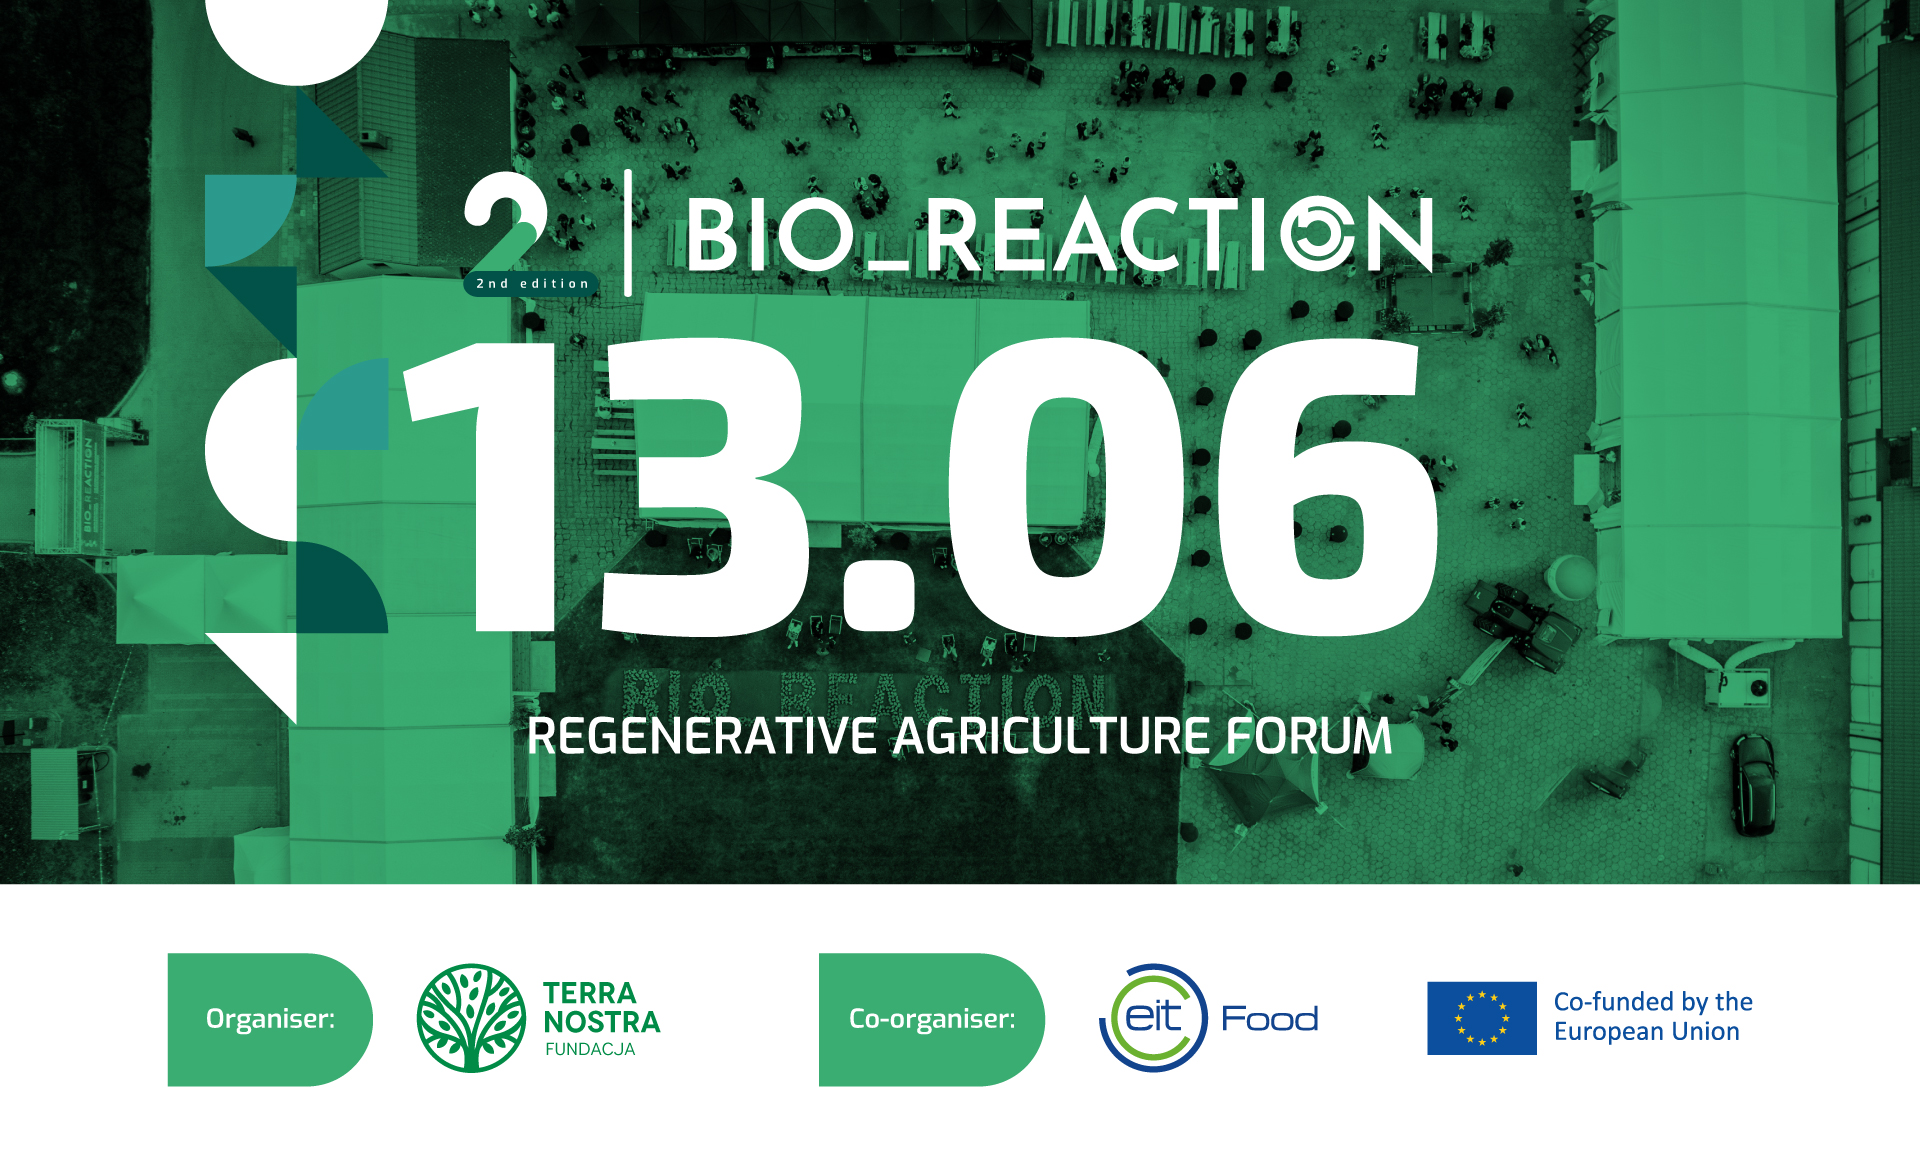 EIT Food and Terra Nostra co-organise the 2nd International Forum on Regenerative Agriculture, BIO_REACTION Terra Nostra and EIT Food is honored to invite you to the second edition of the International Forum on Regenerative Agriculture, BIO_REACTION, taking place on June 13, 2024, in Pierzchno near Poznań, Poland. This forum will offer a unique opportunity for networking and exchange of experiences for agricultural entrepreneurs, scientists, and industry representatives from across Europe. As co-organisers, we aim to promote sustainable agricultural practices that contribute to transforming the food system. The event is free, and registration can be completed at www.bioreaction.pl/zapisy. “The future ahead of us is one where regenerative agriculture is not just a trend but the foundation of a sustainable food system. The BIO_REACTION forum is where this vision crystallizes into reality through innovation, dynamic collaboration, and robust knowledge exchange," says Marja-Liisa Meurice, Director of EIT Food North-East. Agriculture evolution in the spotlight The BIO_REACTION program will feature panel discussions such as "Regenerative Agriculture – Evolution or Revolution?" with participation from farmers involved in the EIT Food Regenerative Agriculture Programme; "Soil Richness: A Farmer's Responsibility and Guarantee for Yielding"; as well as stories from farmers who have successfully implemented regenerative practices. There will also be scientific debates on climate change and carbon farming, discussing its environmental benefits and dispelling related myths, along with practical discussions about the future of enterprises in a sustainable food supply chain, featuring Marja-Liisa Meurice, Director of EIT Food North-East. Frédéric Thomas – a visionary of agroecology as guest of honor. Among the invited speakers is Frédéric Thomas, a French farmer and agroecology expert, who has been engaged in regenerative agriculture on his farm in Dhuizon for over 30 years. Interactive experiences and field innovations – the practical side of BIO_REACTION During the forum, participants will not only listen to inspiring lectures but also experience regenerative agriculture in action. This practical segment of the event offers a unique chance to get acquainted with the latest technologies in the field. Innovative experiments and agricultural practices revolutionizing modern agriculture will be showcased, providing an opportunity to see, touch, and assess the potential of new solutions proposed by startups affiliated with various EIT Food programs. “Innovation and entrepreneurship are the driving forces of future agriculture. Every agrifood sector startup participating in BIO_REACTION will present solutions that address the real needs of both farmers and consumers," says Ewa Karólewska, Senior Manager of Startups at EIT Food. Networking and concert The day will culminate with time for networking at thematic tables and an evening full of relaxation and entertainment, featuring a barbecue and concert by Dizzy Boyz Brass Band + Daniel Moszczyński. Participant information We encourage you to register and join us to shape the future of sustainable food production. In addition to the on-site event, this year's edition of BIO_REACTION will also be available via an online stream on LinkedIn: www.linkedin.com/events/7195809662867247104, enabling participants from around the world to join the discussions. Those interested in participating in the forum in Pierzchno can register through the official website: www.bioreaction.pl/zapisy. The forum, being a unique gathering in Poland, offers an unparalleled opportunity to directly familiarize with practices and achievements in regenerative agriculture that can contribute to increasing the sustainability and efficiency of agricultural production both economically and ecologically. Join us for this inspiring event that combines theory with practice in striving to improve the efficiency of agriculture, highlighting mutual benefits of cooperation between farmers and the food industry, and actions for a healthier future of our planet. Press Contact magdalena. About EIT Food EIT Food is the world’s largest and most dynamic food innovation community. We accelerate innovation to build a future-fit food system that produces healthy and sustainable food for all.   Supported by the European Institute of Innovation and Technology (EIT), a body of the European Union, we invest in projects, organisations and individuals that share our goals for a healthy and sustainable food system. We unlock innovation potential in businesses and universities and create and scale agrifood startups to bring new technologies and products to market. We equip entrepreneurs and professionals with the skills needed to transform the food system and put consumers at the heart of our work, helping build trust by reconnecting them to the origins of their food. We are one of nine innovation communities established by the European Institute of Innovation and Technology (EIT), an independent EU body set up in 2008 to drive innovation and entrepreneurship across Europe. The Regenerative Innovation Portfolio is a collaboration platform bringing together a wide array of actors within Europe to action the critical systemic shifts we need to fix our broken food system. The Portfolio is established by EIT Food in collaboration with Food Innovation Hub Europe Initiative and Foodvalley NL. It seeks to unlock new partnerships across the food and agriculture value chain, bringing practical solutions that will enable viable short and long-term business models for farmers who want to transition towards regenerative agriculture. Our mission is to remove system level barriers to adoption of regenerative agriculture by farmers and do so by demonstrating pathways to transform at scale, boosting the supply and value of regeneratively produced products and delivered ecosystem services while de-risking the farmers in the transition. The EIT Food Regenerative Agriculture Programme, which aims to support farmers across Europe in transitioning to regenerative agriculture. It promotes sustainable farming practices that not only positively impact soil quality but also contribute to the production of food with higher nutritional value. The EIT Food Regenerative Agriculture Programme includes on-site training for farmers, advising, as well as webinars and manuals on regenerative practices for specific crops, available to all interested farmers. Furthermore, we organise events promoting regenerative agriculture and carry out educational activities for consumers. Our approach is based on collaboration among various stakeholders, such as farmers, researchers, startups, the processing industry, and consumers, to jointly create beneficial and lasting conditions for the development of regenerative agriculture. Find out more at www.eitfood.eu or follow us via social media: Twitter, Facebook, LinkedIn, YouTube and Instagram.  